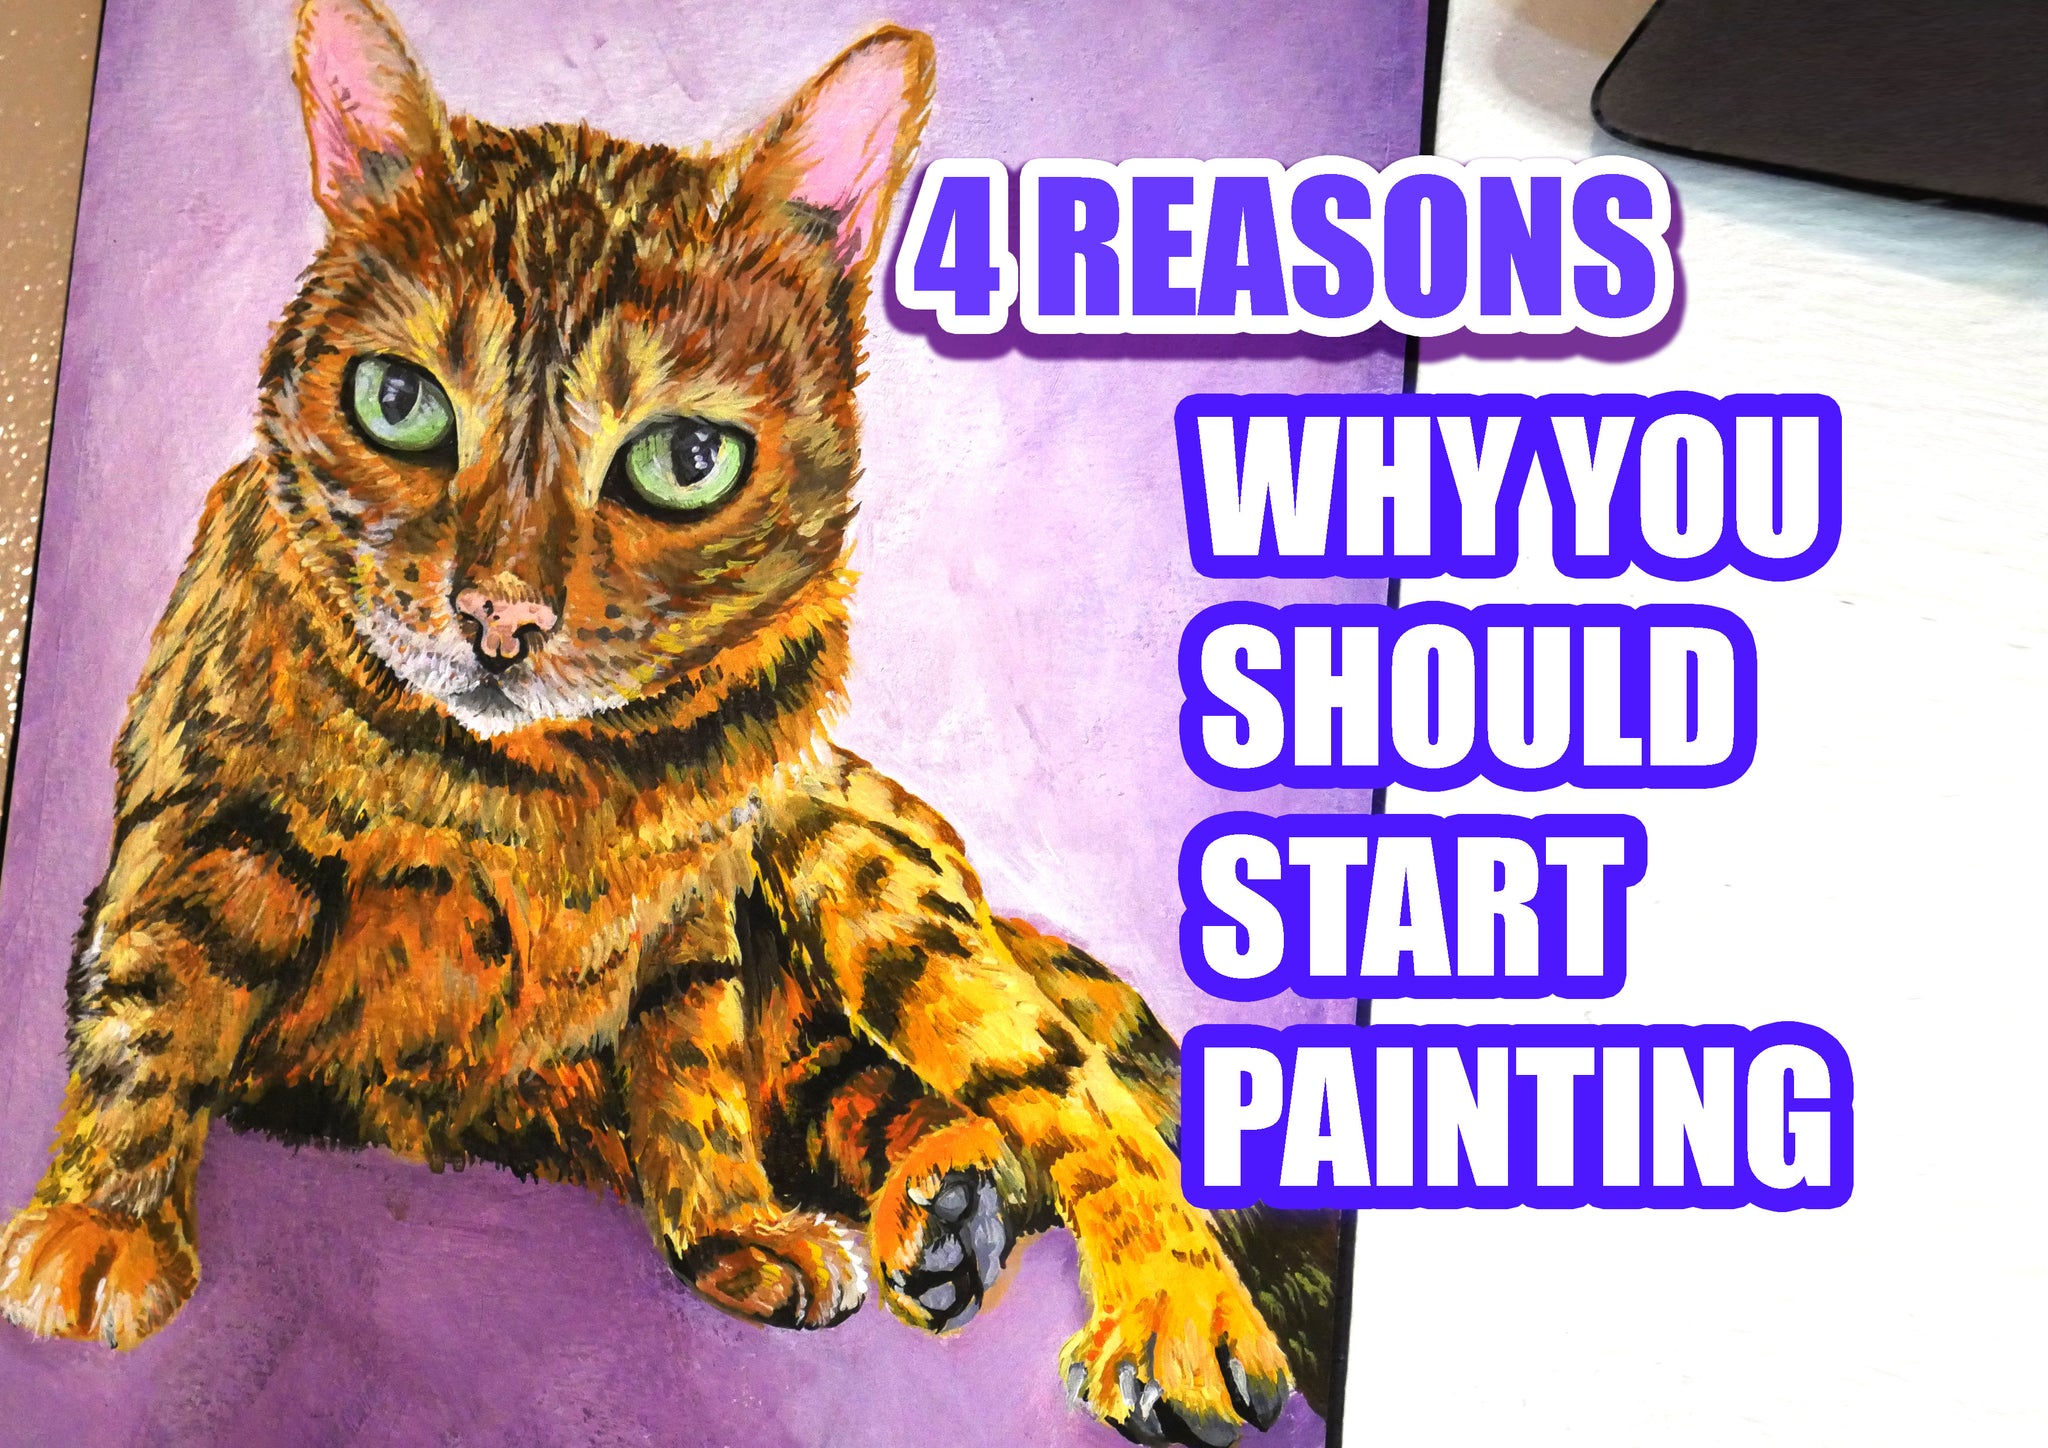 4 reasons why you should start painting! ♥